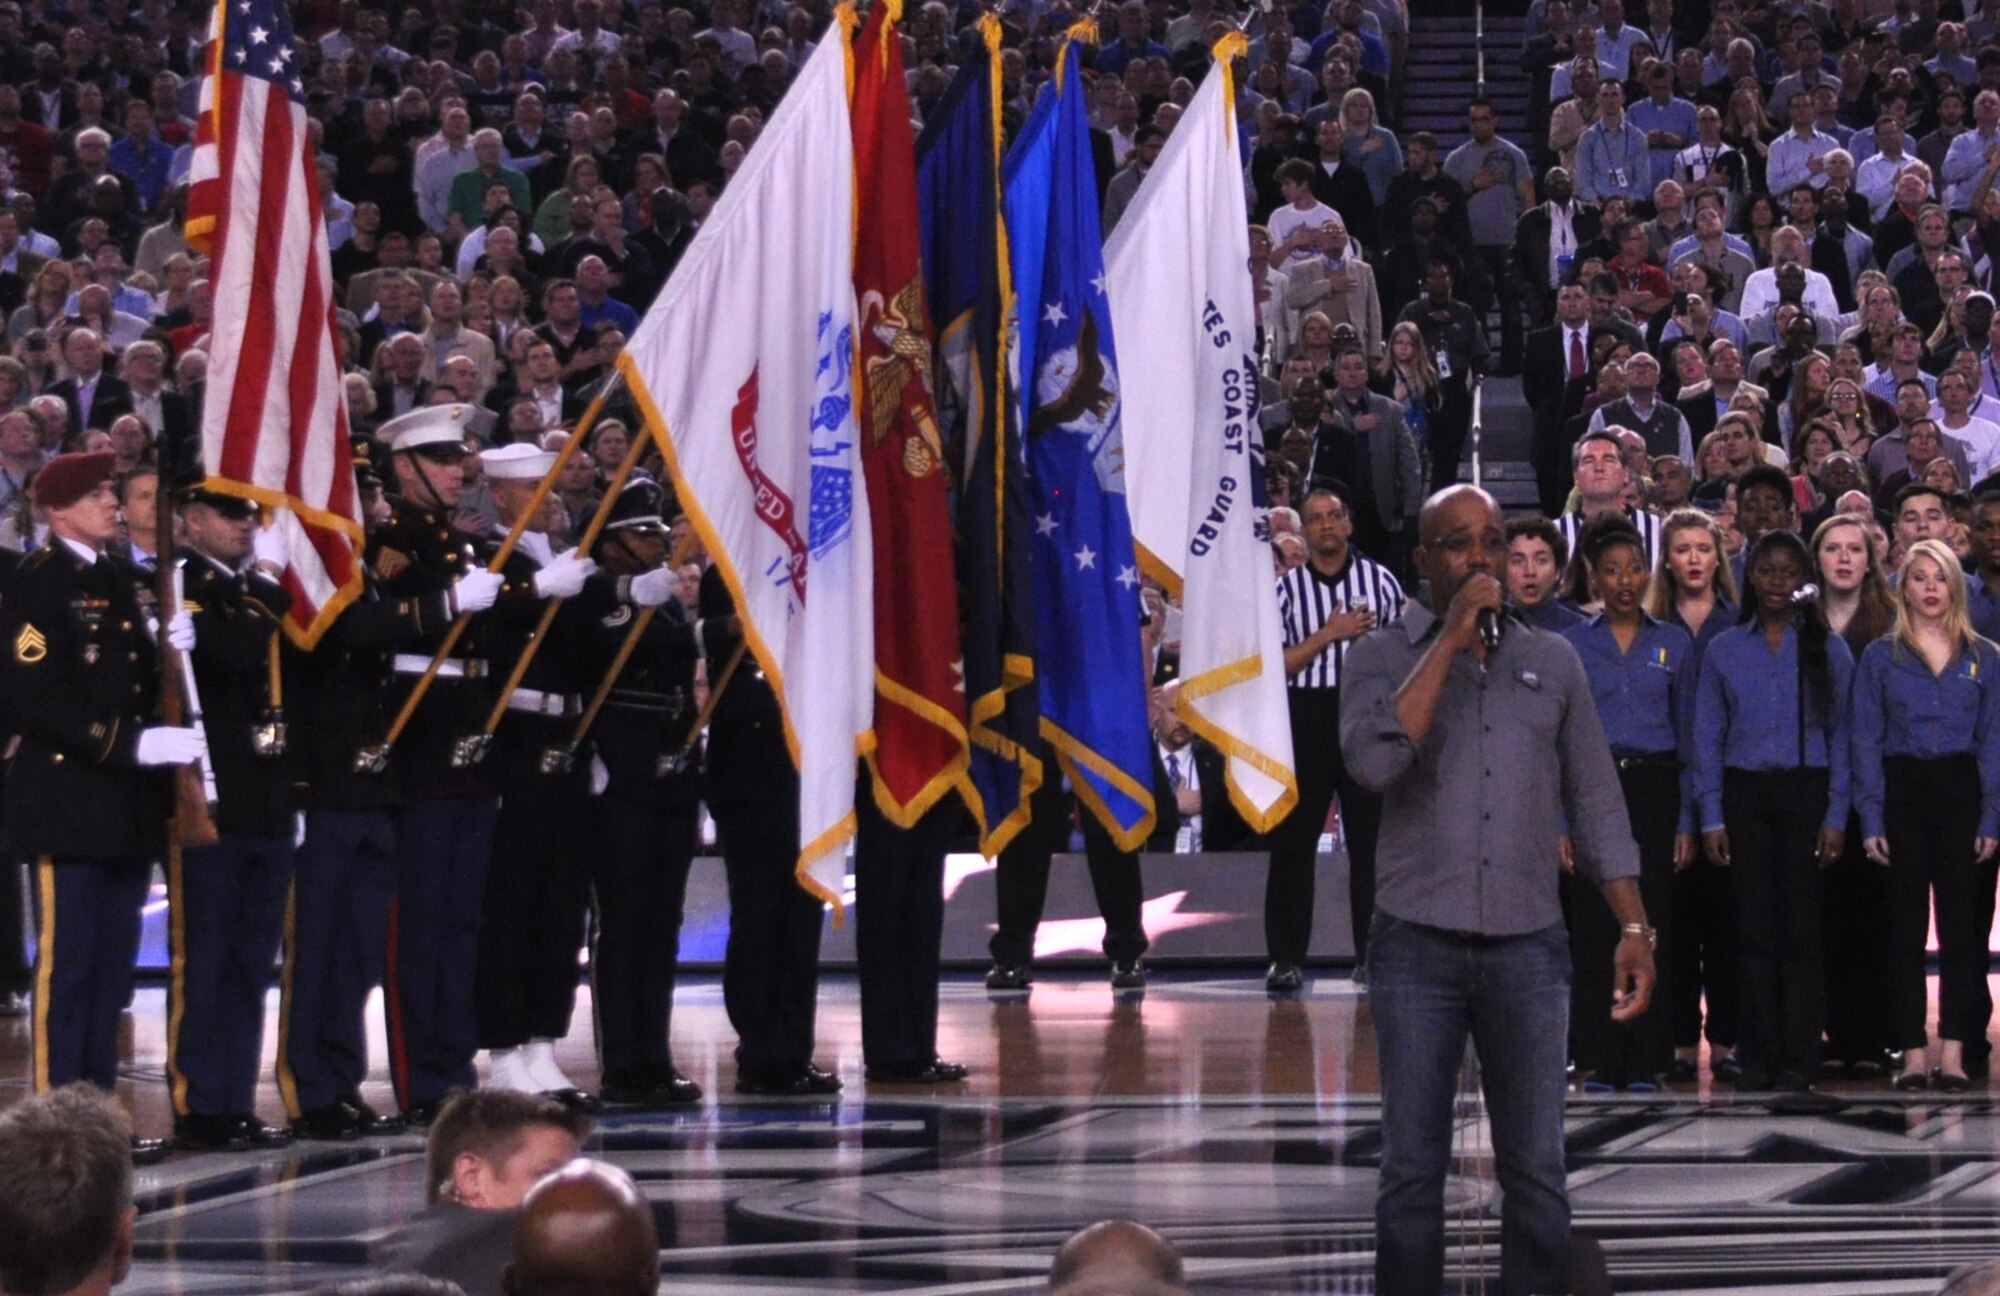 The 301st Fighter Wing Joint Color Guard performed at the opening ceremony before the start of the 2014 NCAA championship game where Darius Rucker sang the National Anthem. In the end, the University of Connecticut outlasted Kentucky, 60-54, at AT&T Stadium in Arlington, Texas, to win their fourth national title. (U.S. Air Force photo/Mr. Darryl Collins)